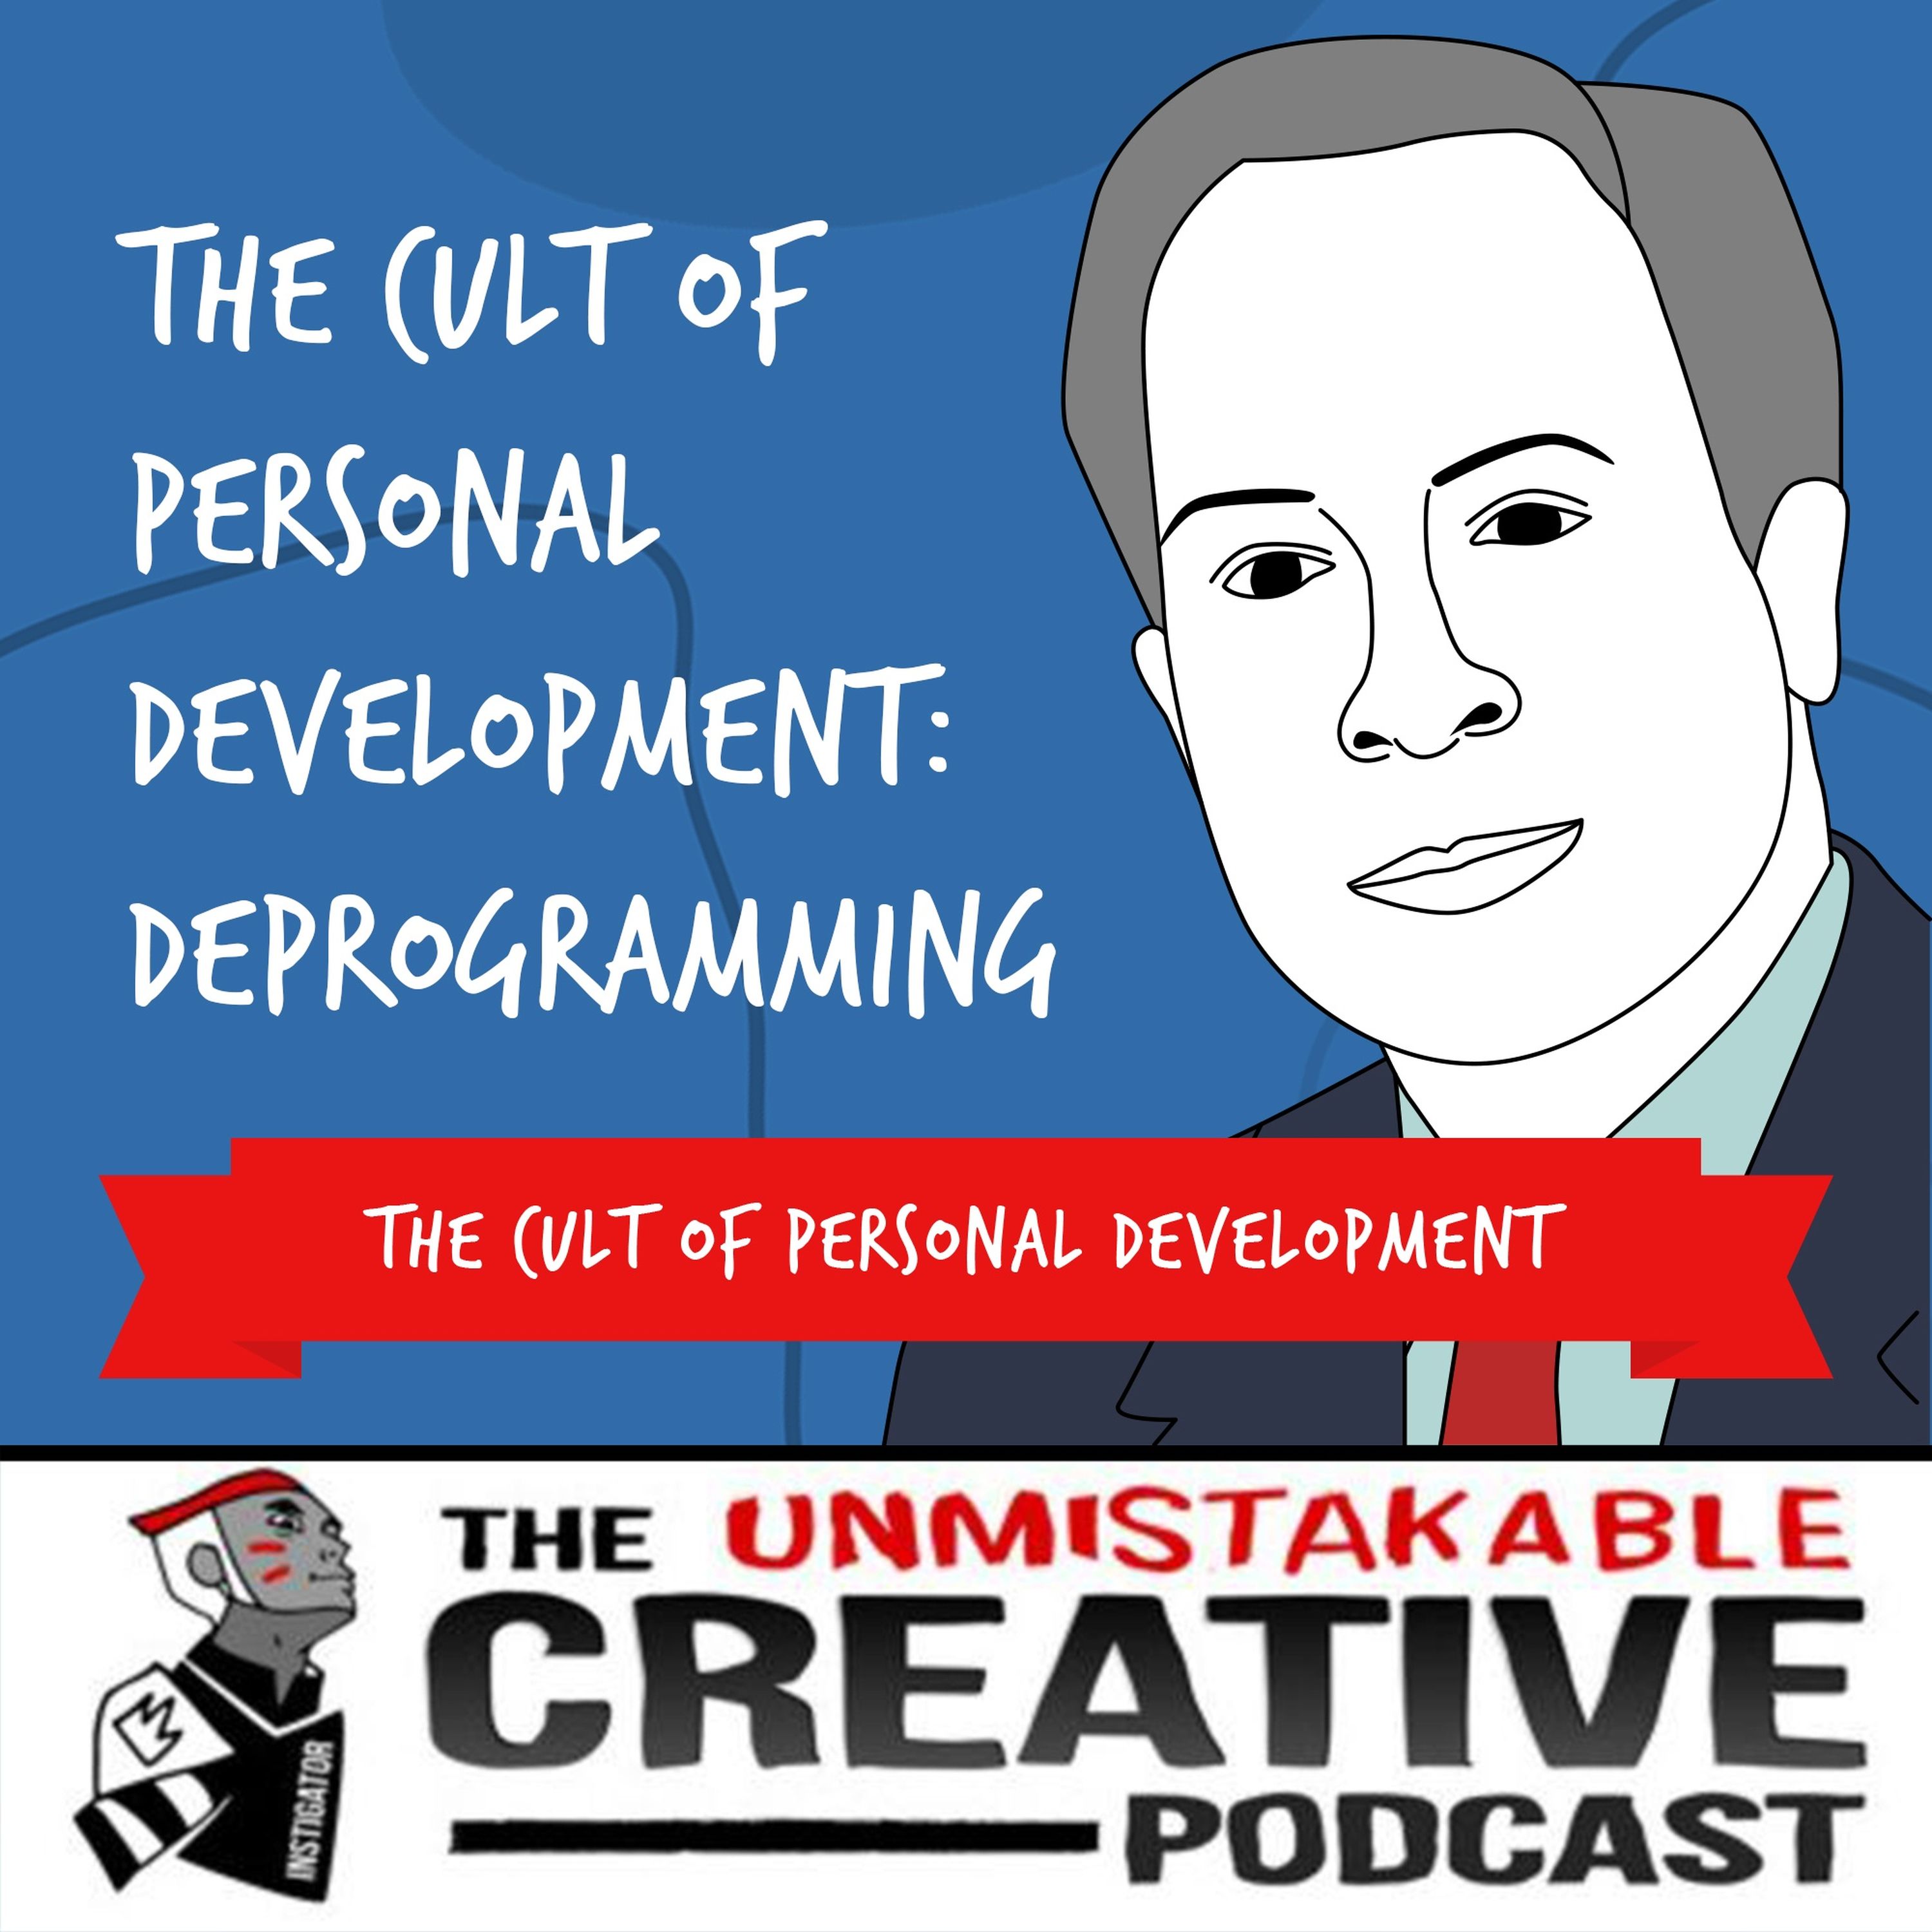 The Cult of Personal Development: Deprogramming with Rick Alan Ross Image